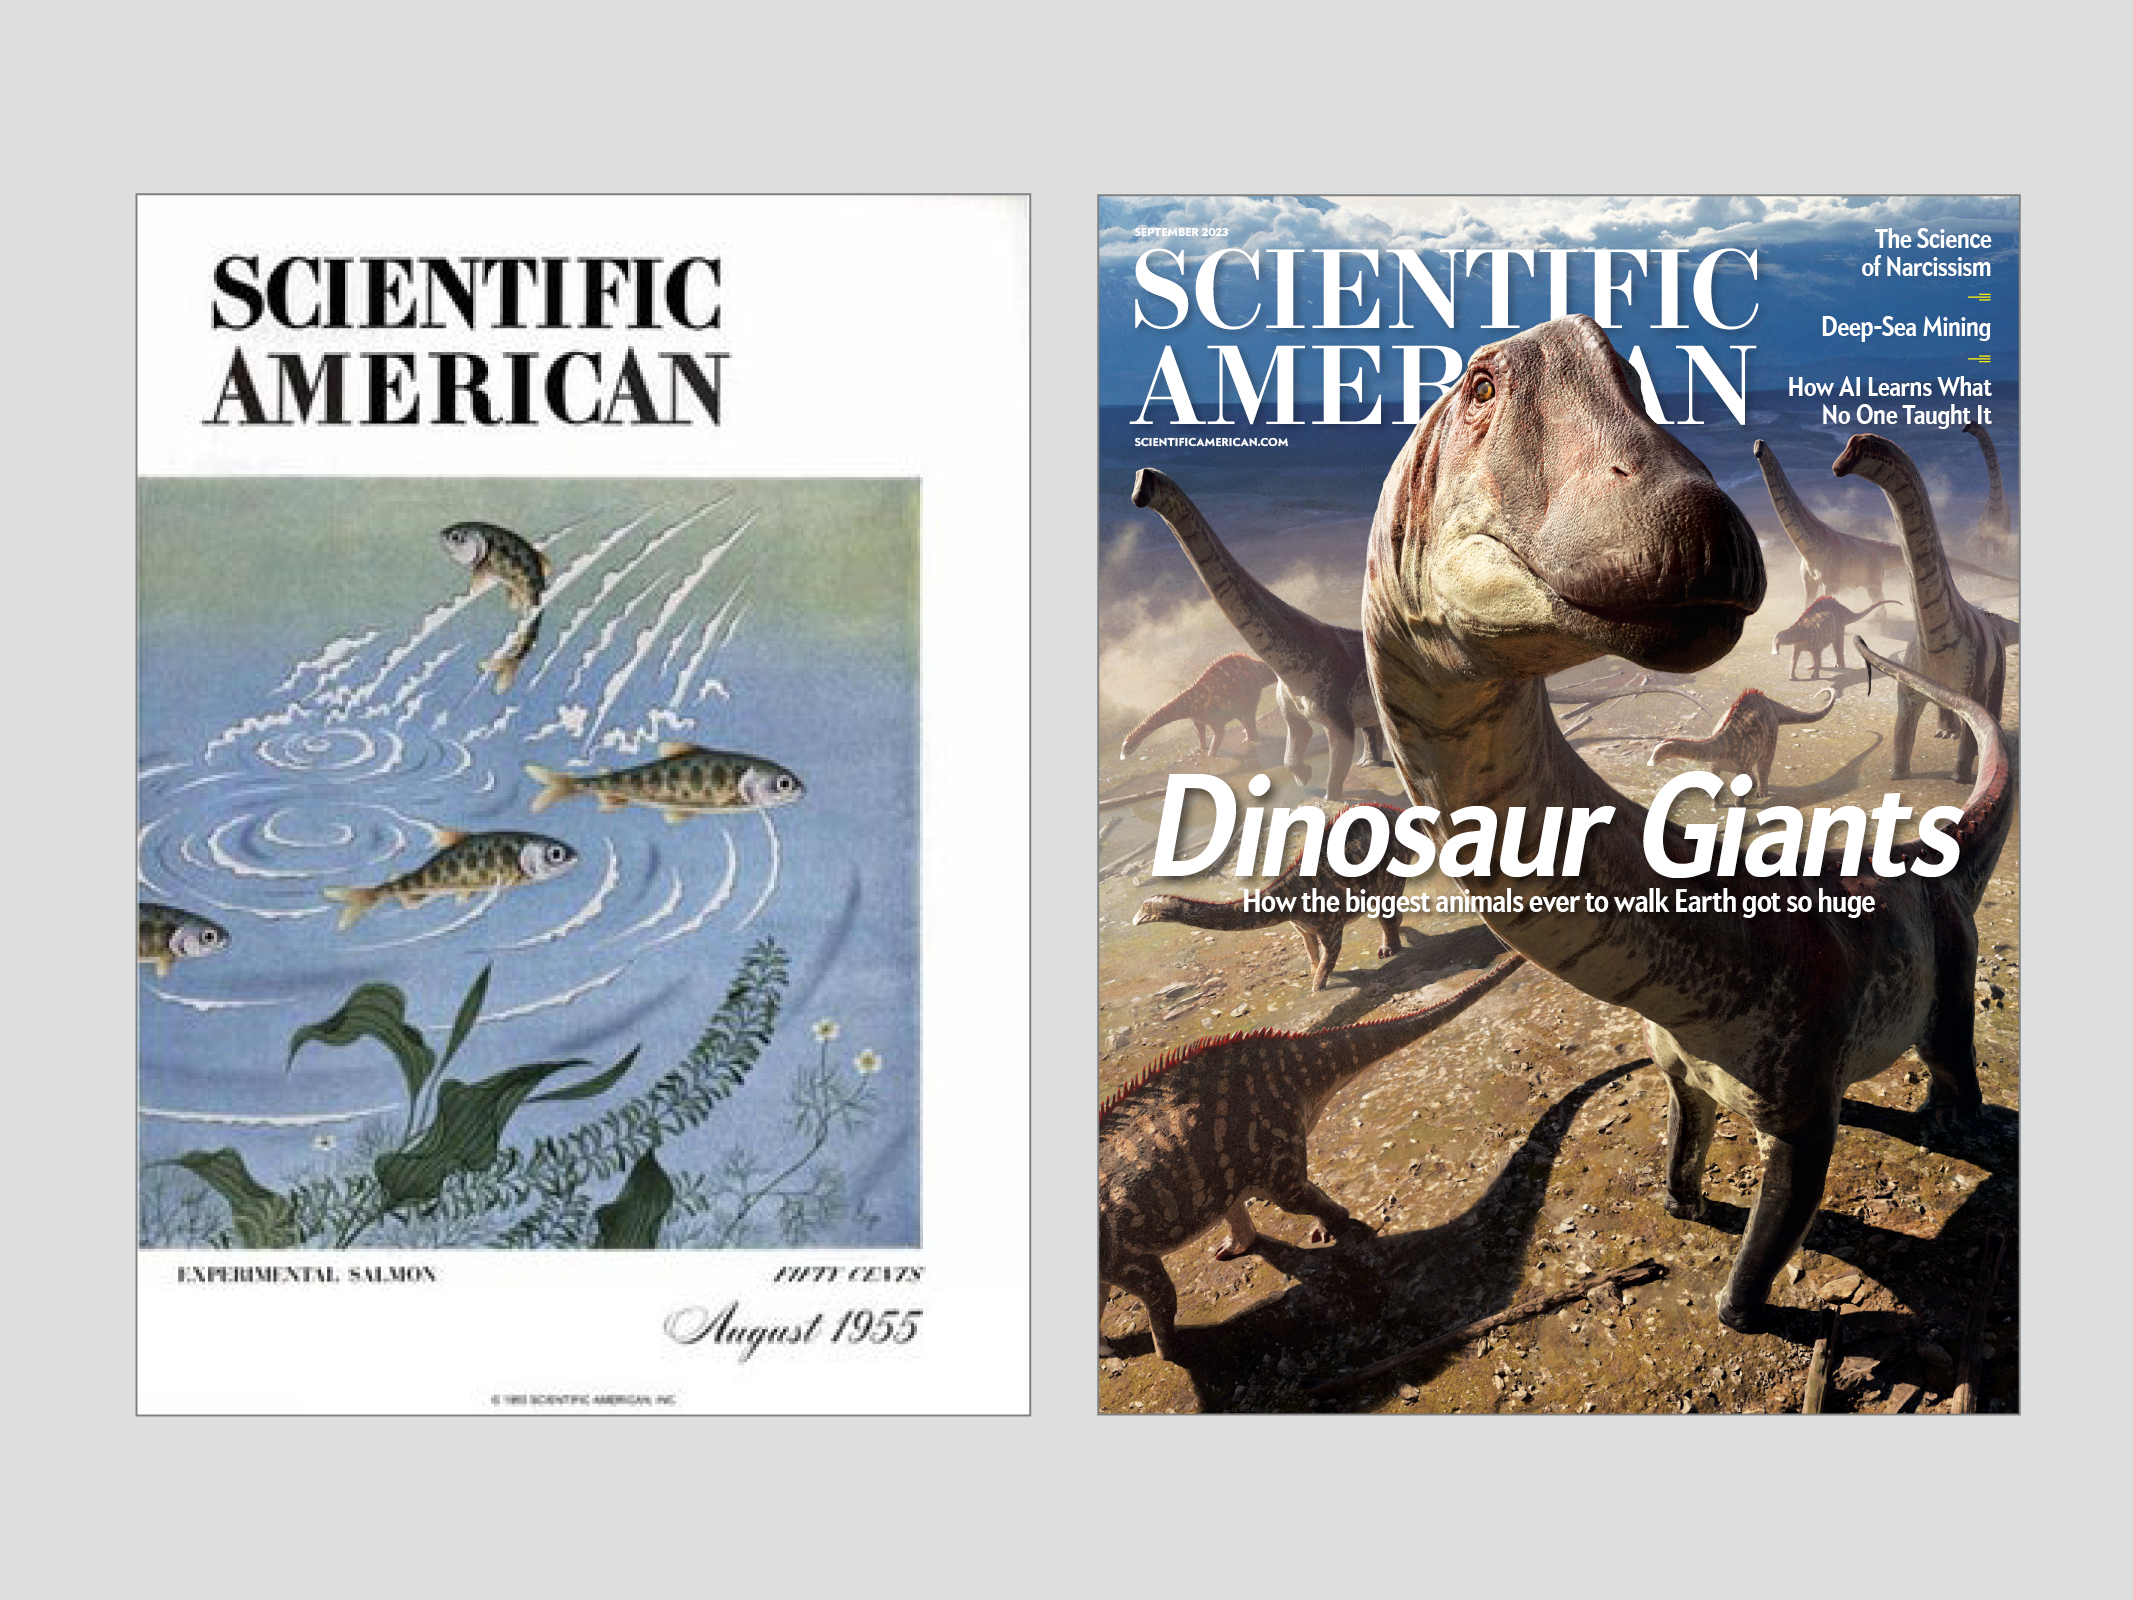 The August 1955 and September 2023 covers of Scientific American.